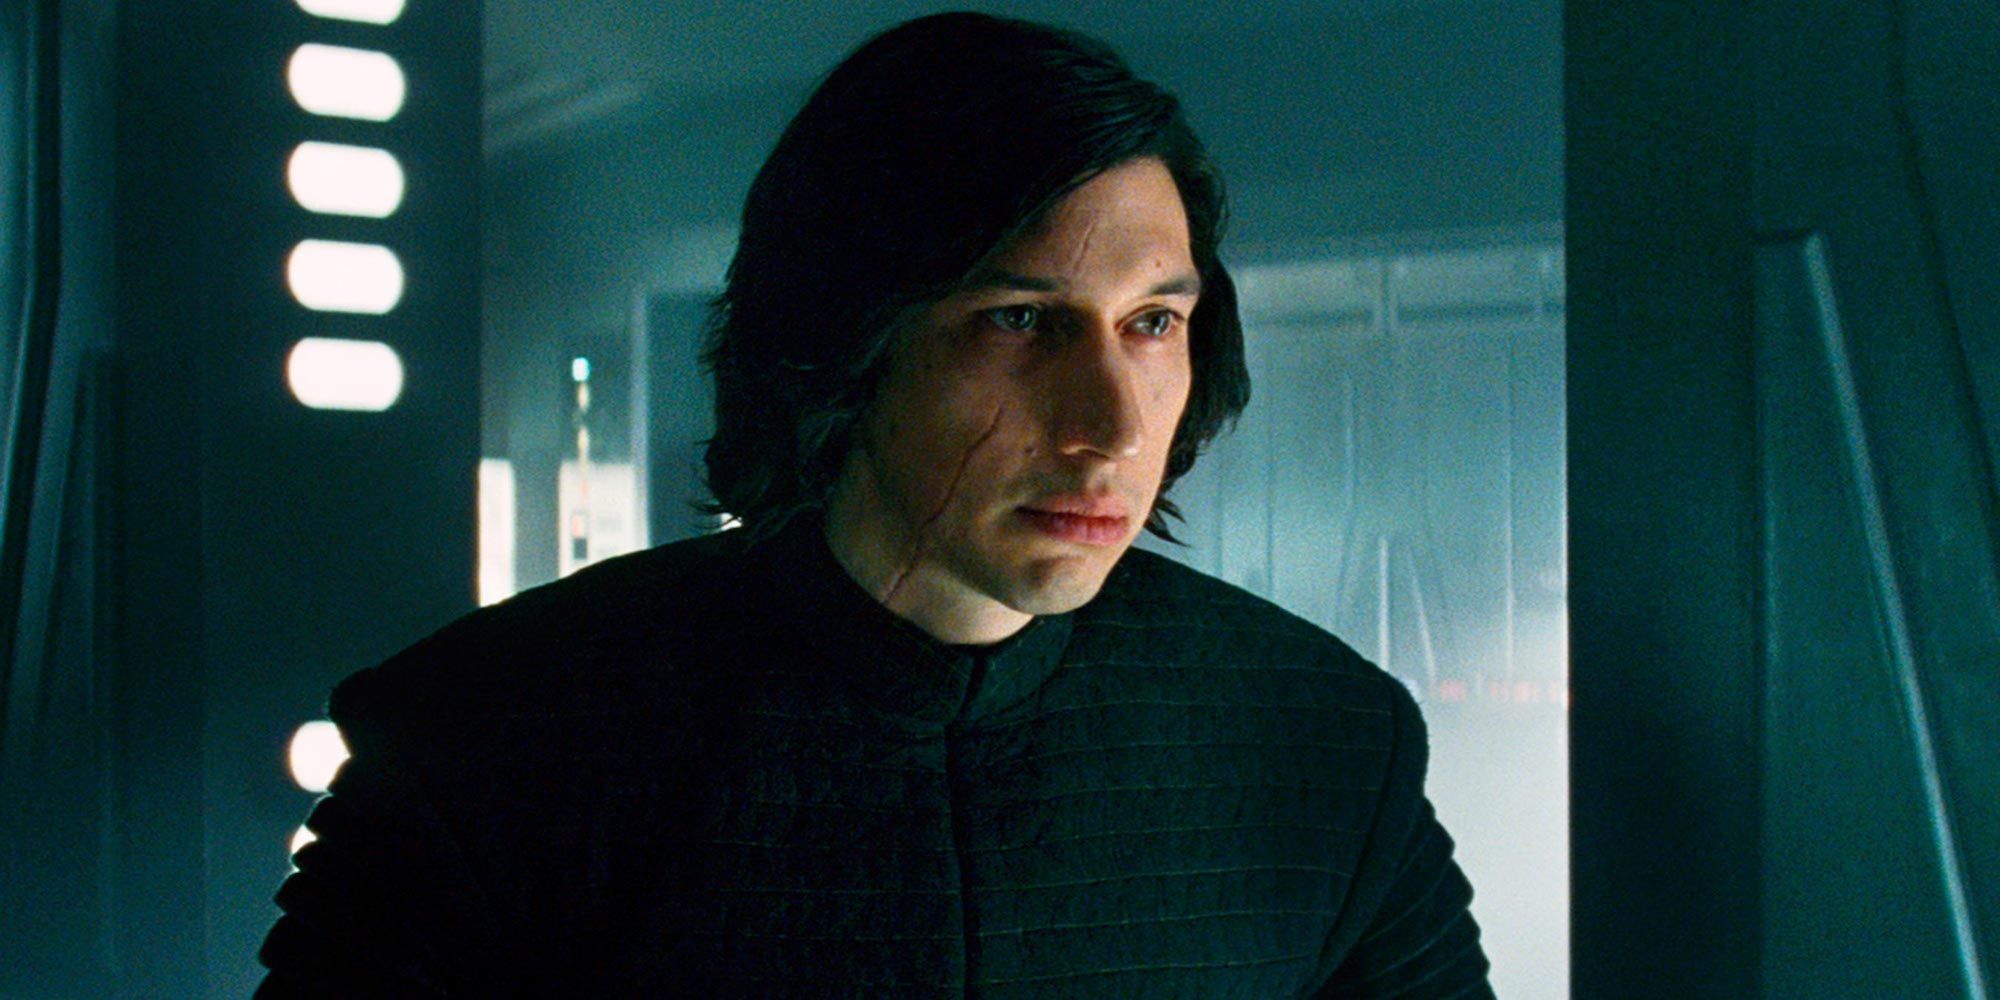 Adam Driver frowning as Kylo Ren in Star Wars The Last Jedi 